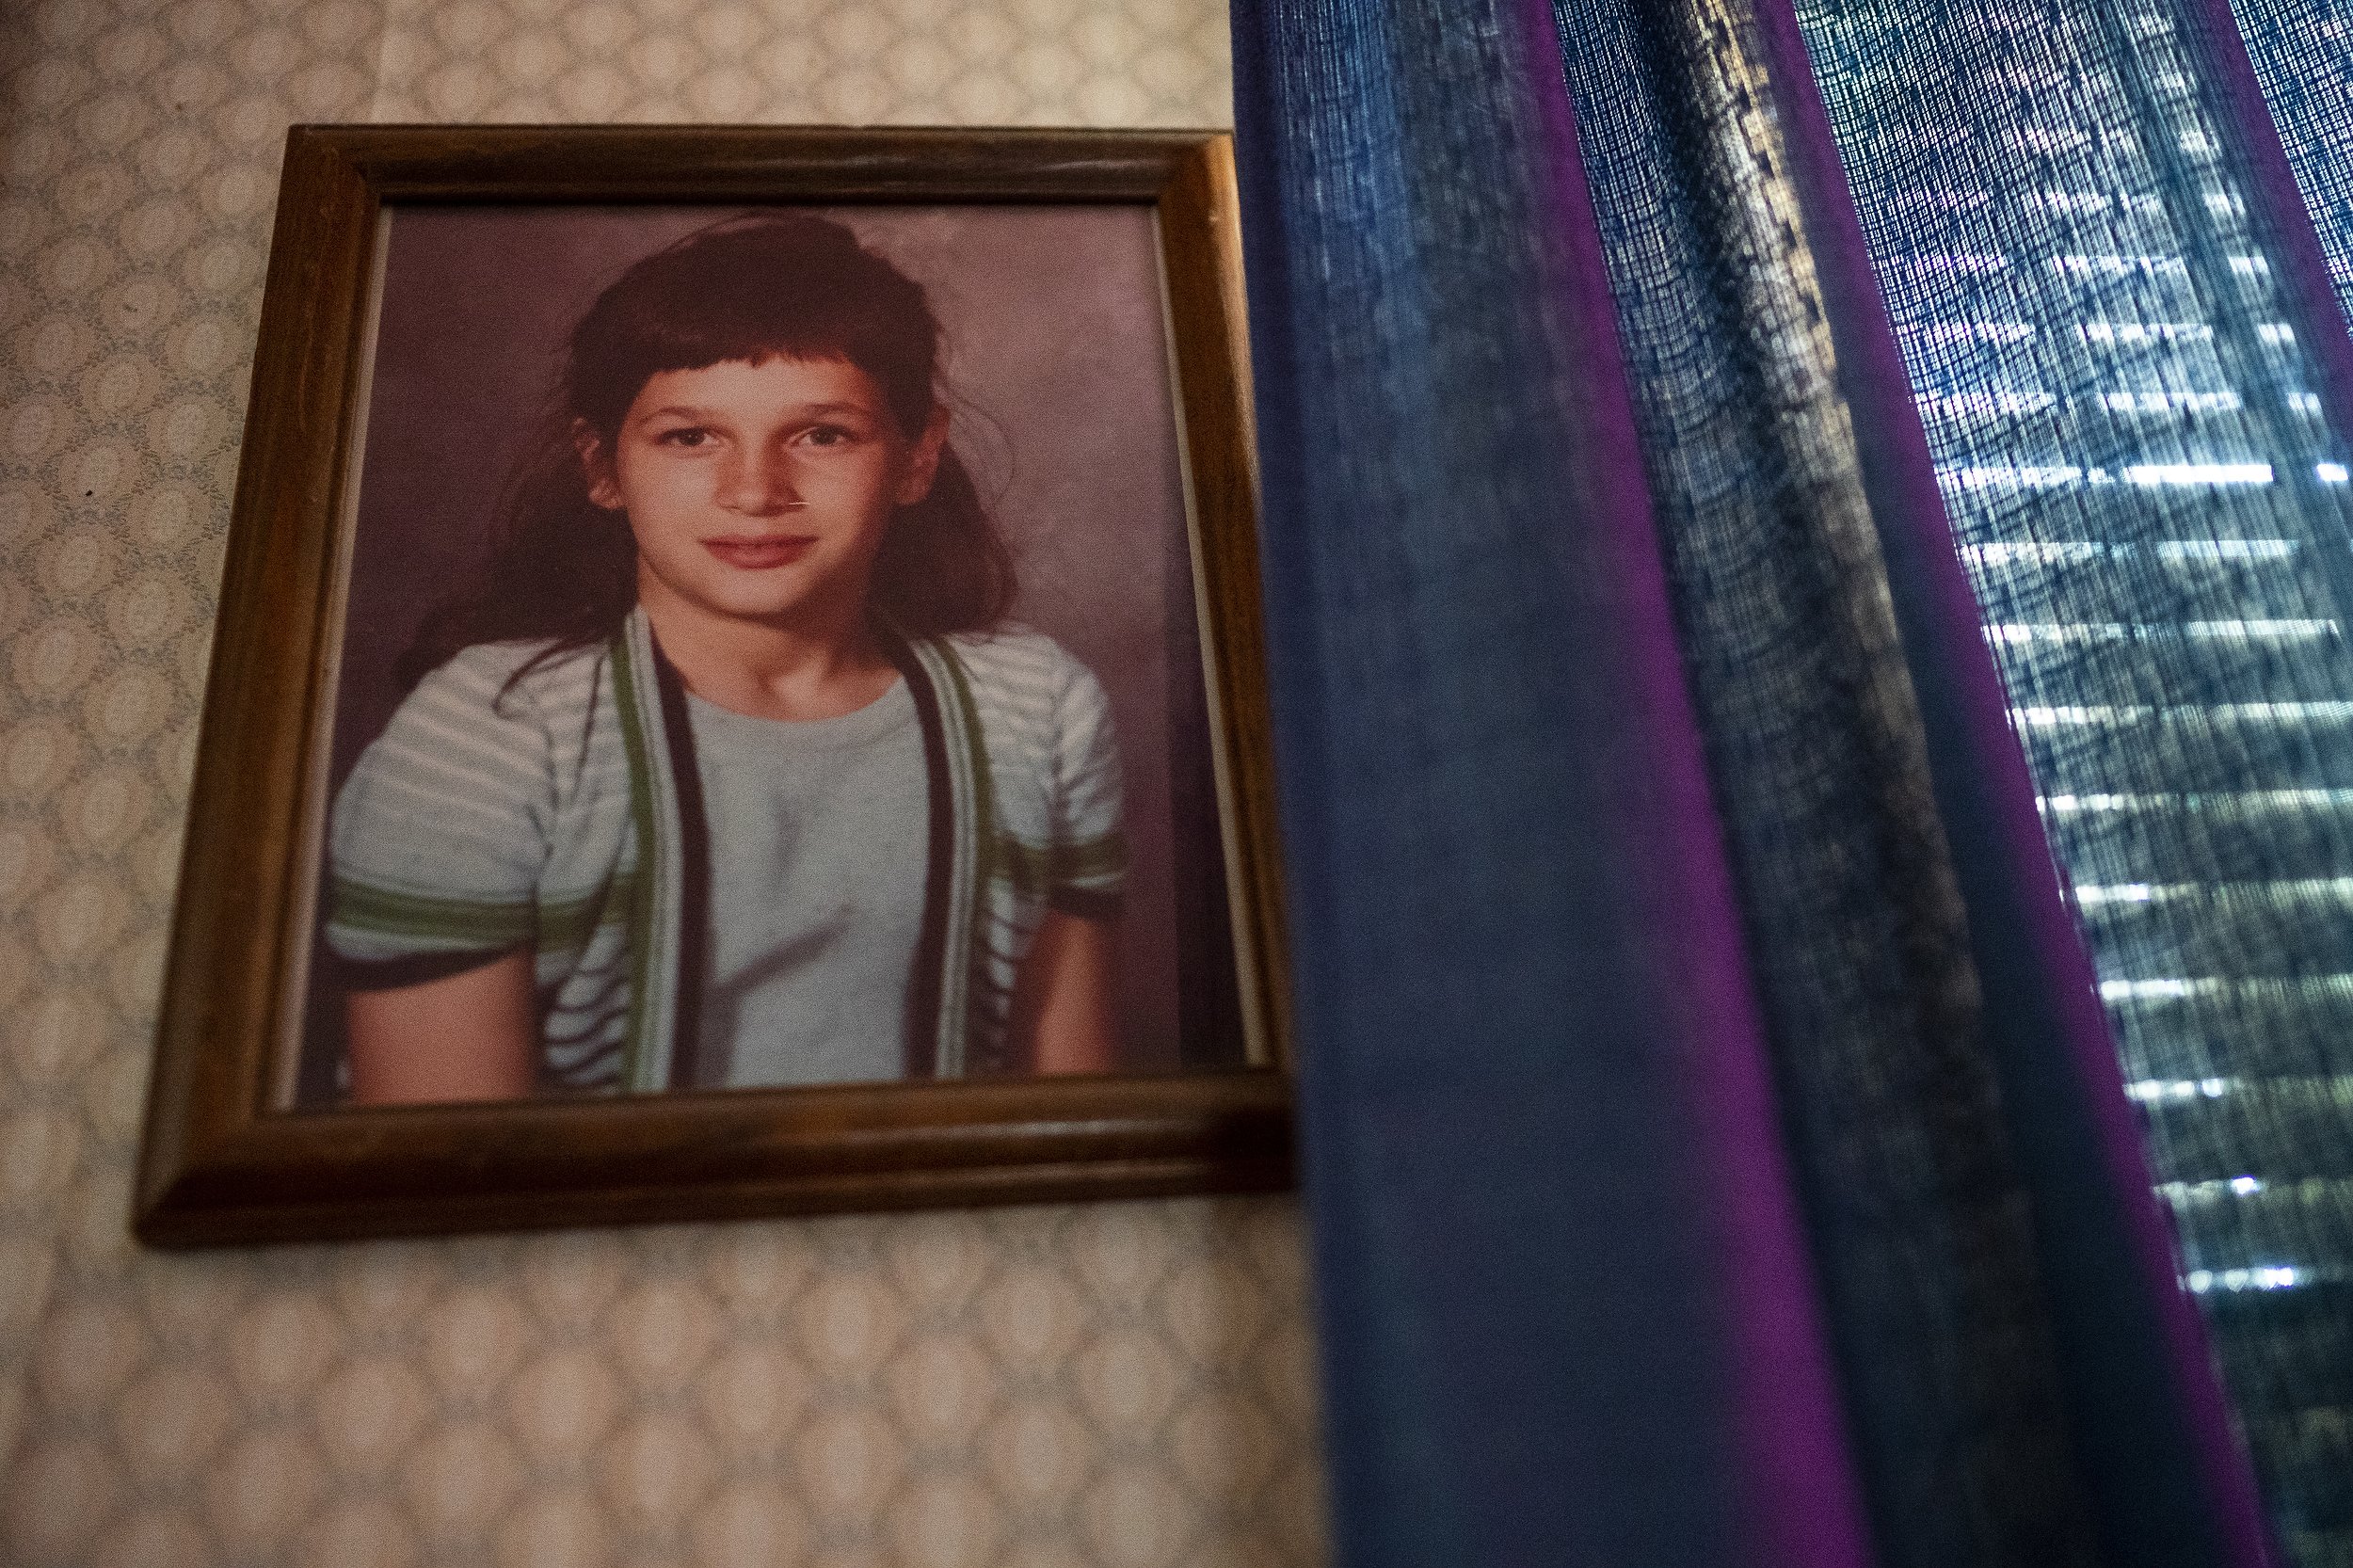  A portrait of Donna Jean Miller, Daryel's deceased older sister, hangs in his father's home. Donna Jean passed at the age of 12 while saving Daryel from drowning in a pool he'd snuck into.  